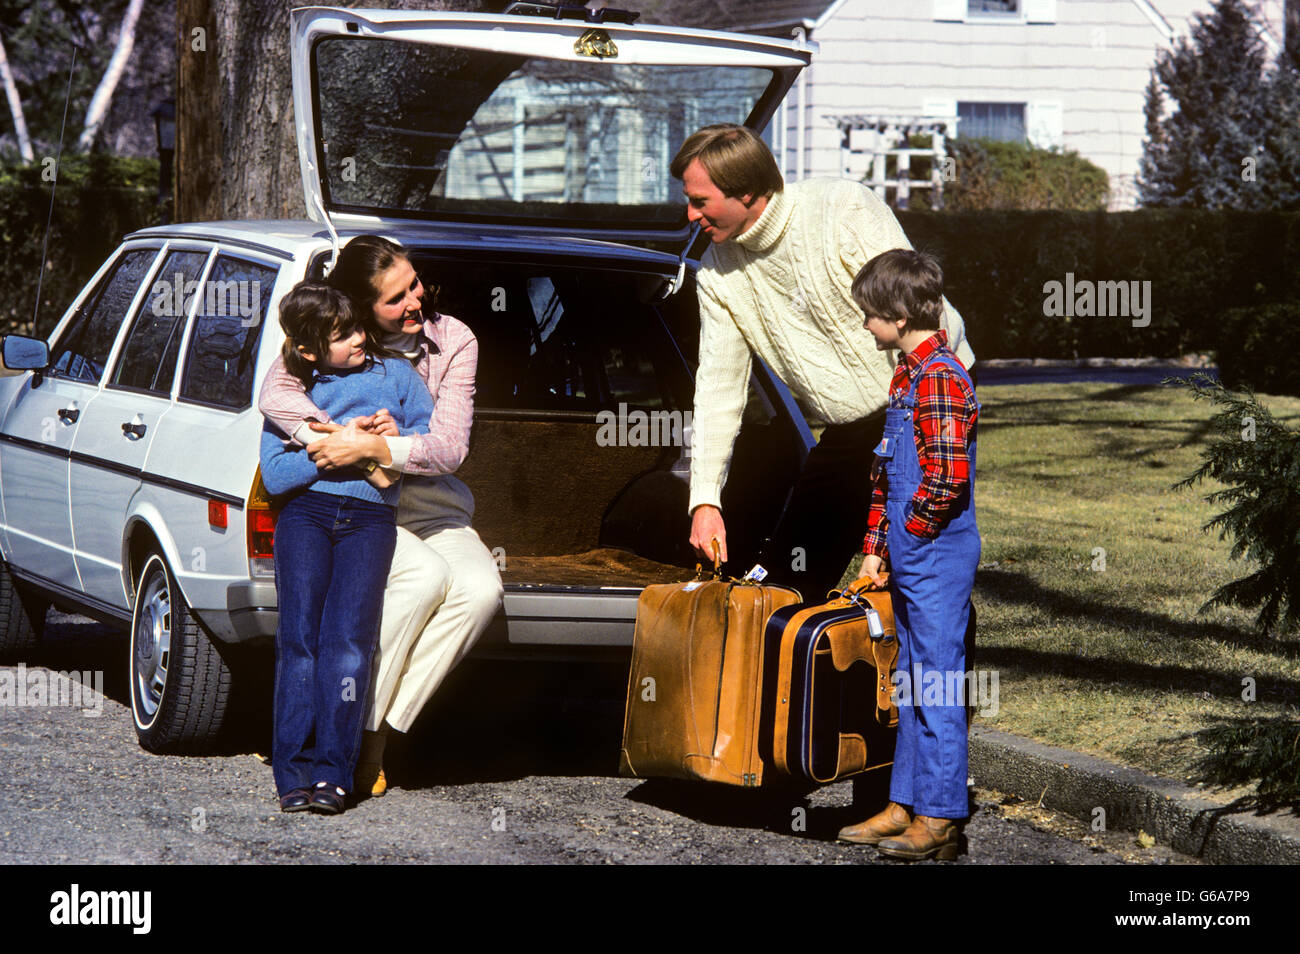 1980s FAMILY OF FOUR GETTING READY FOR  TRIP MOTHER AND DAUGHTER SITTING ON CAR TAILGATE FATHER AND SON CARRYING SUITCASES Stock Photo